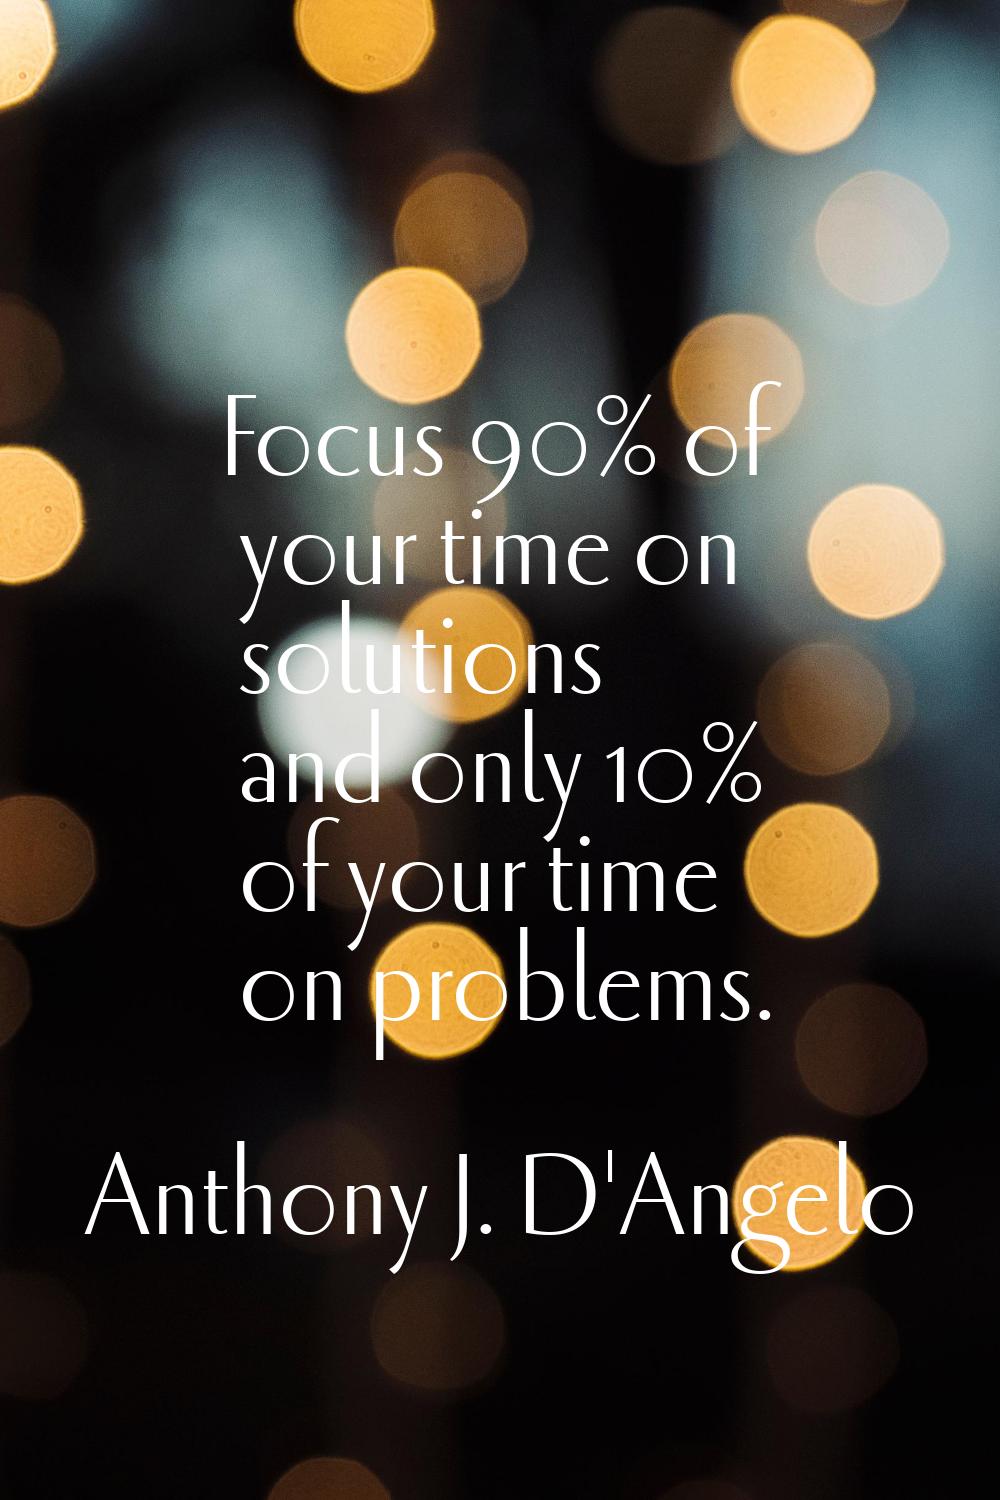 Focus 90% of your time on solutions and only 10% of your time on problems.